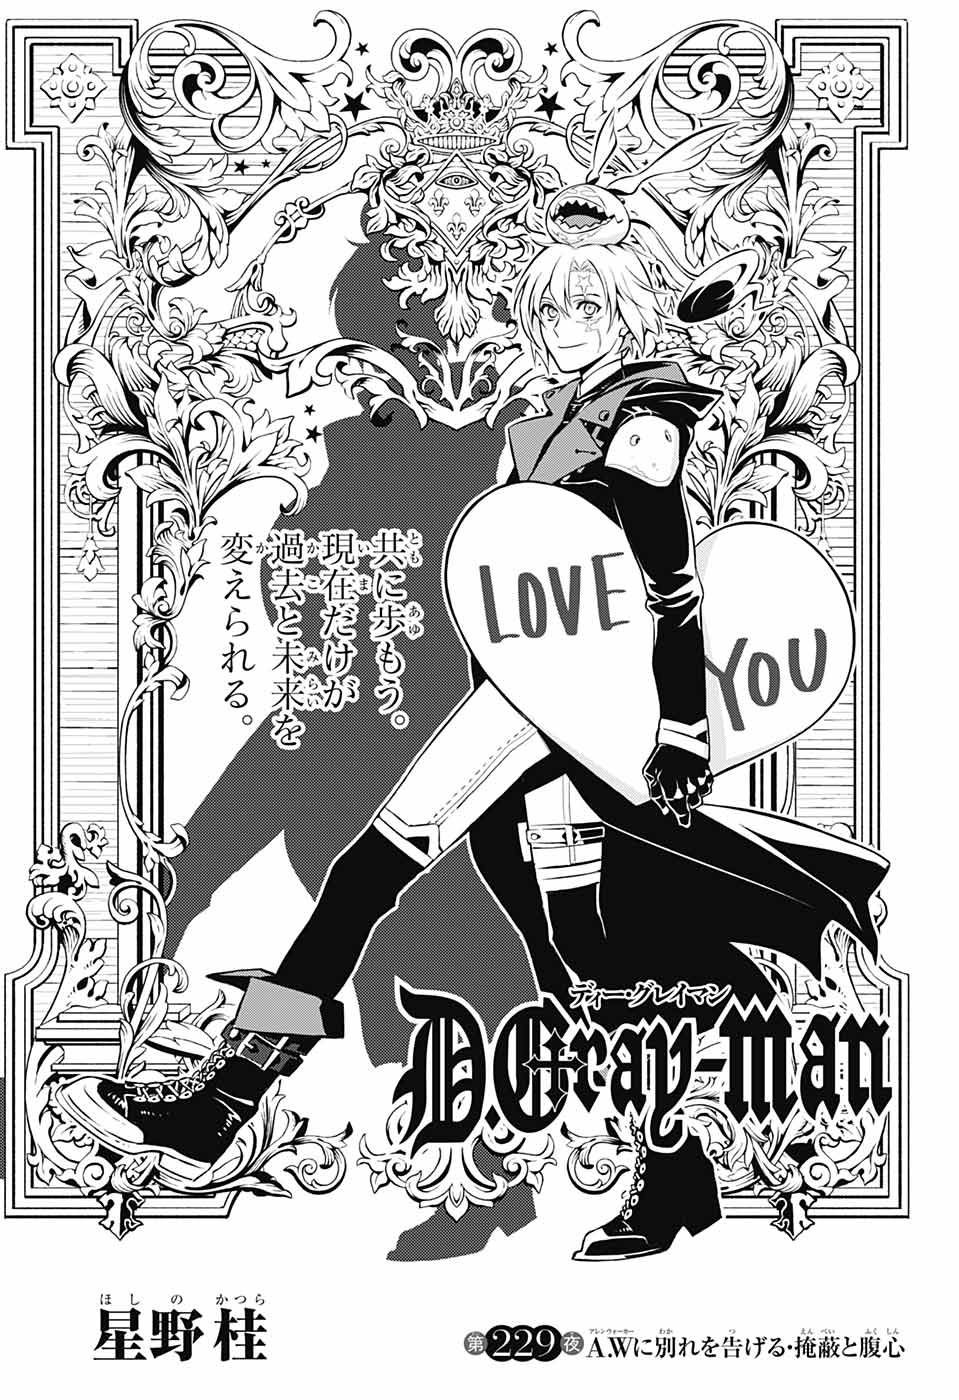 D Gray Man - Chapter 229 - Page 1